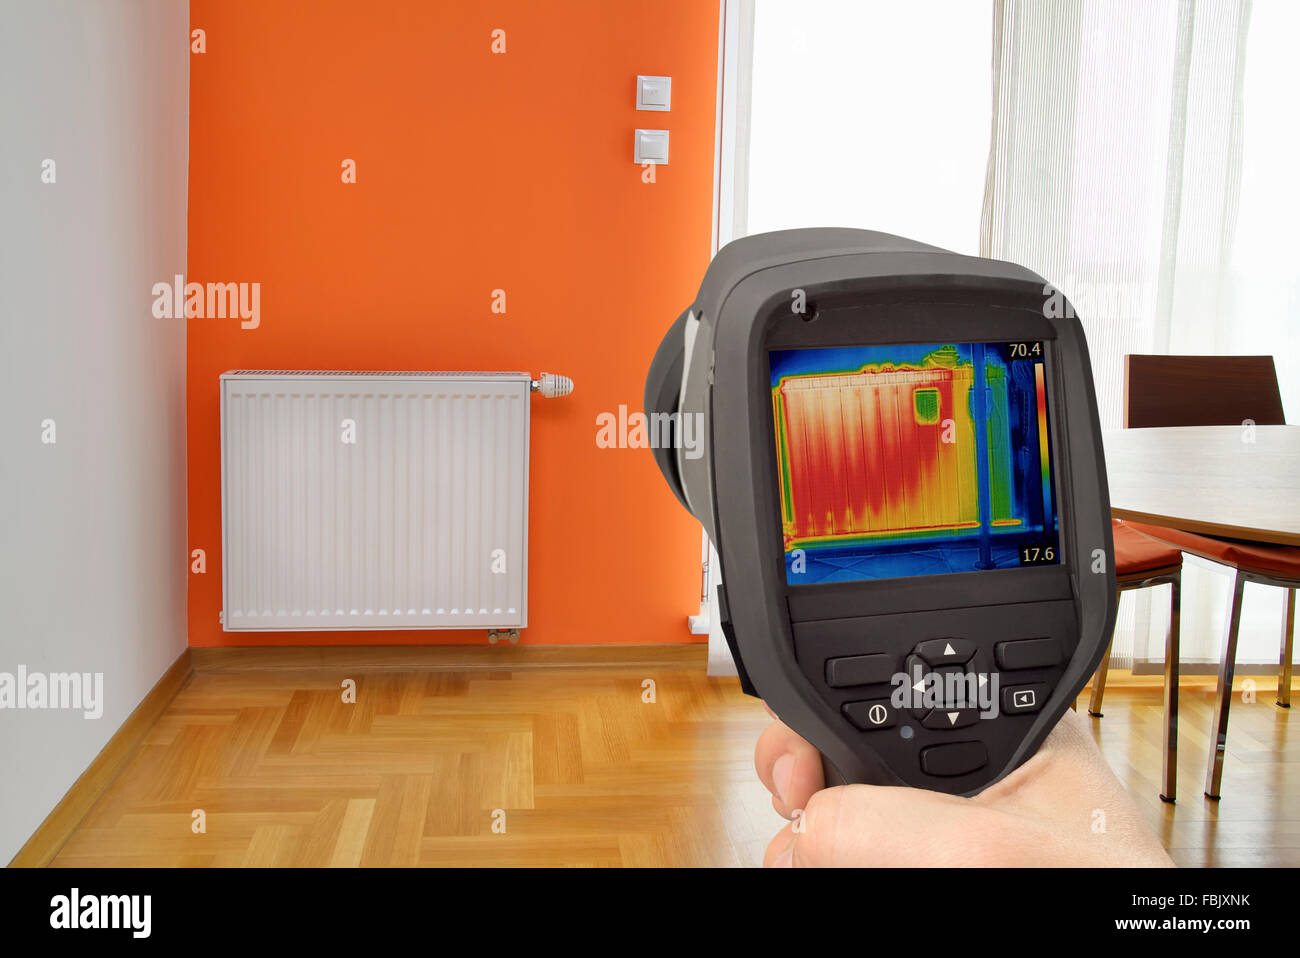 Heat loss Detection in Central Heating Radiator Stock Photo